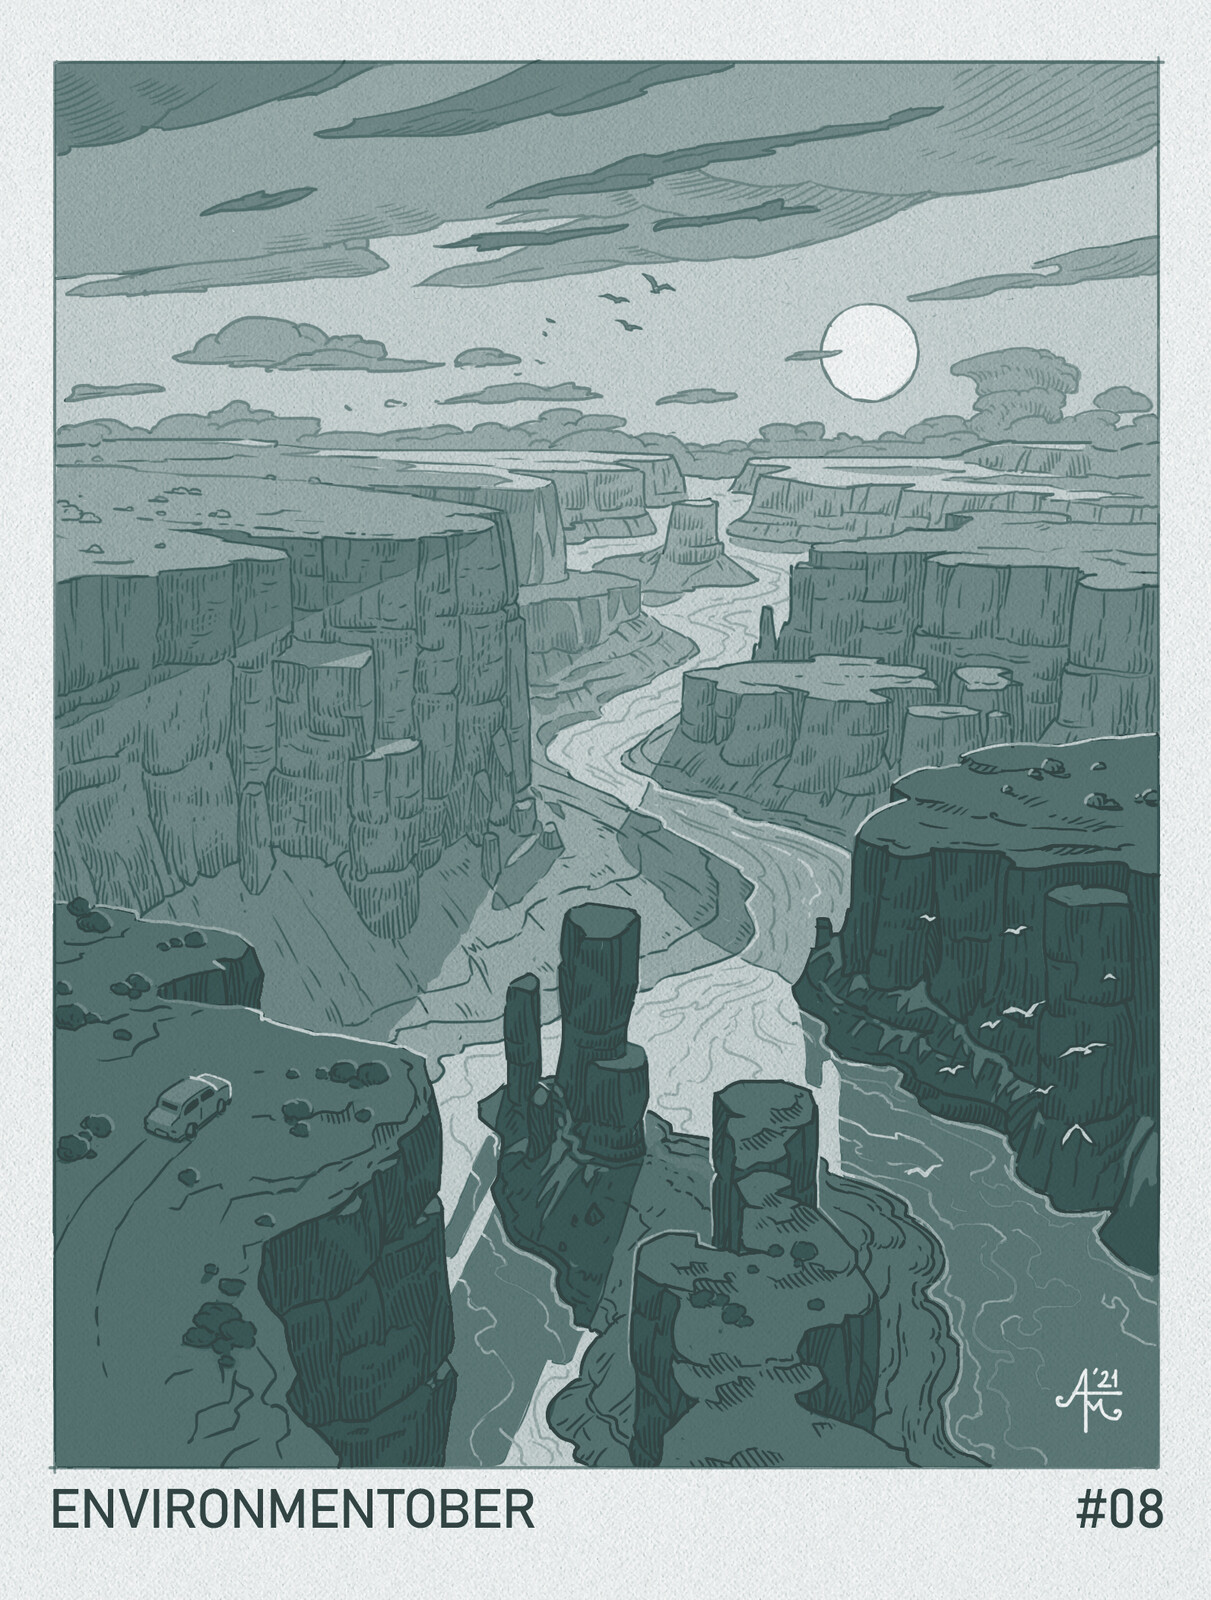 Day 8 - Canyon